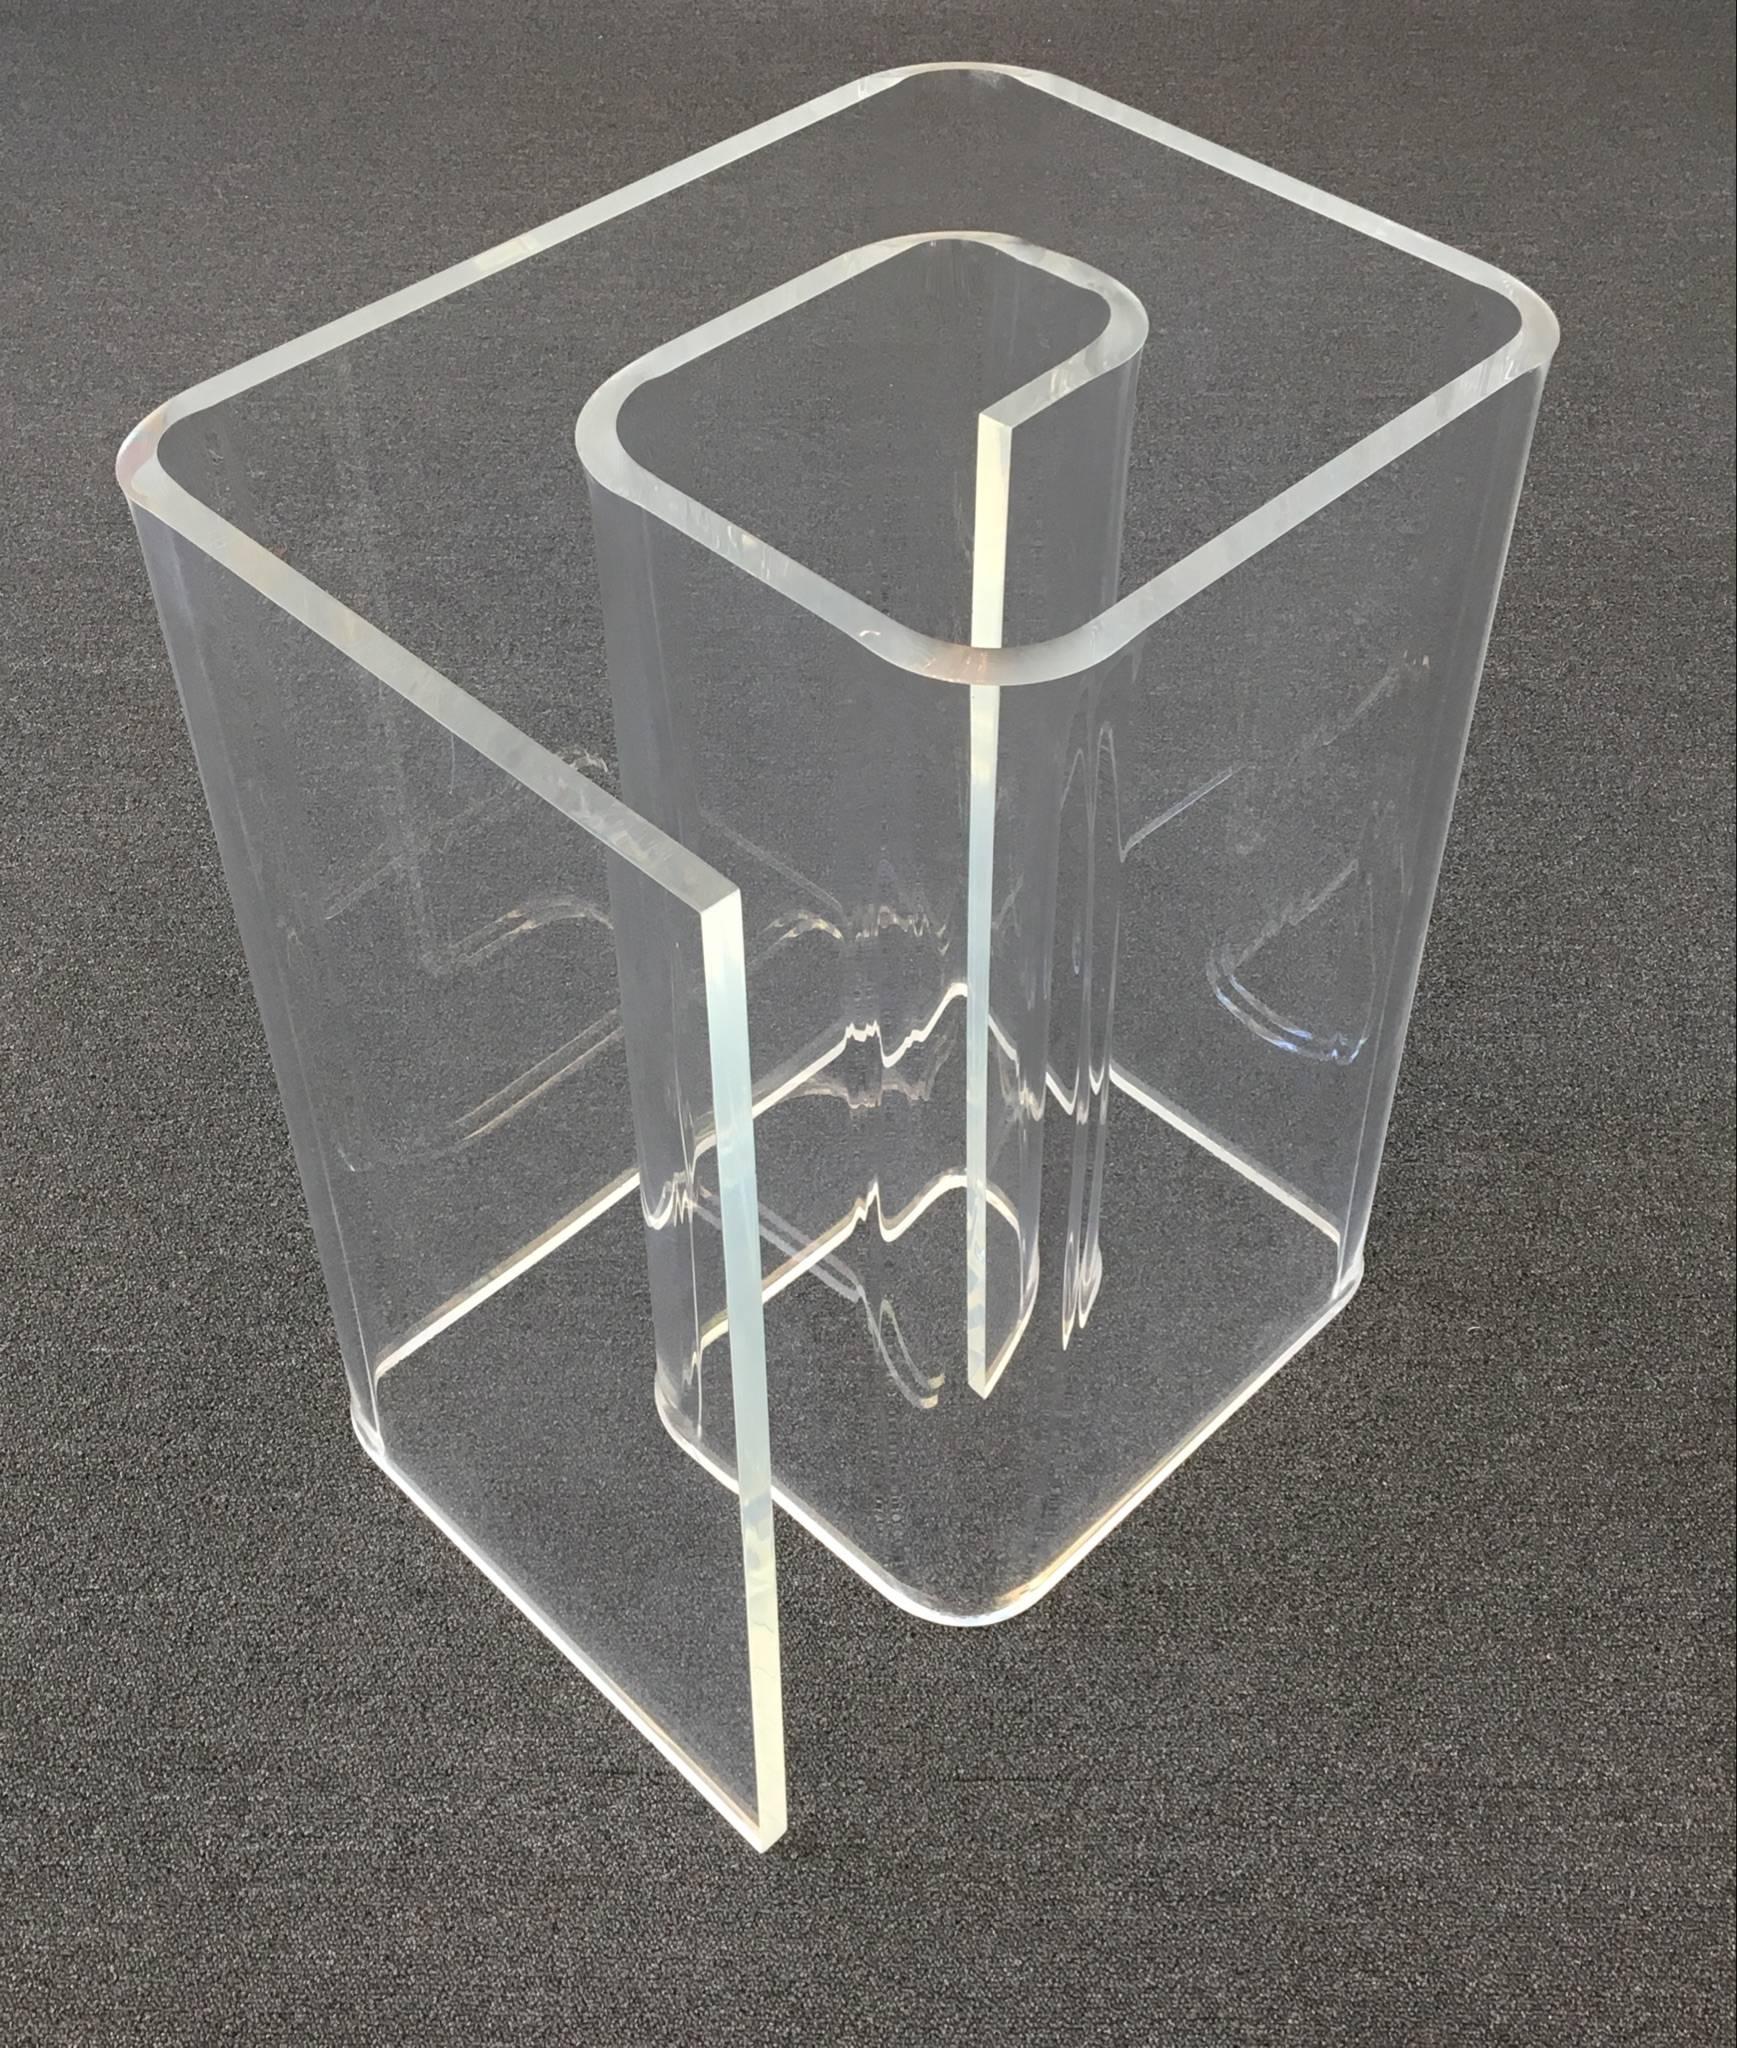 A 1970s acrylic and glass dining table in the shape of a snail.
The acrylic and glass top is 3/4